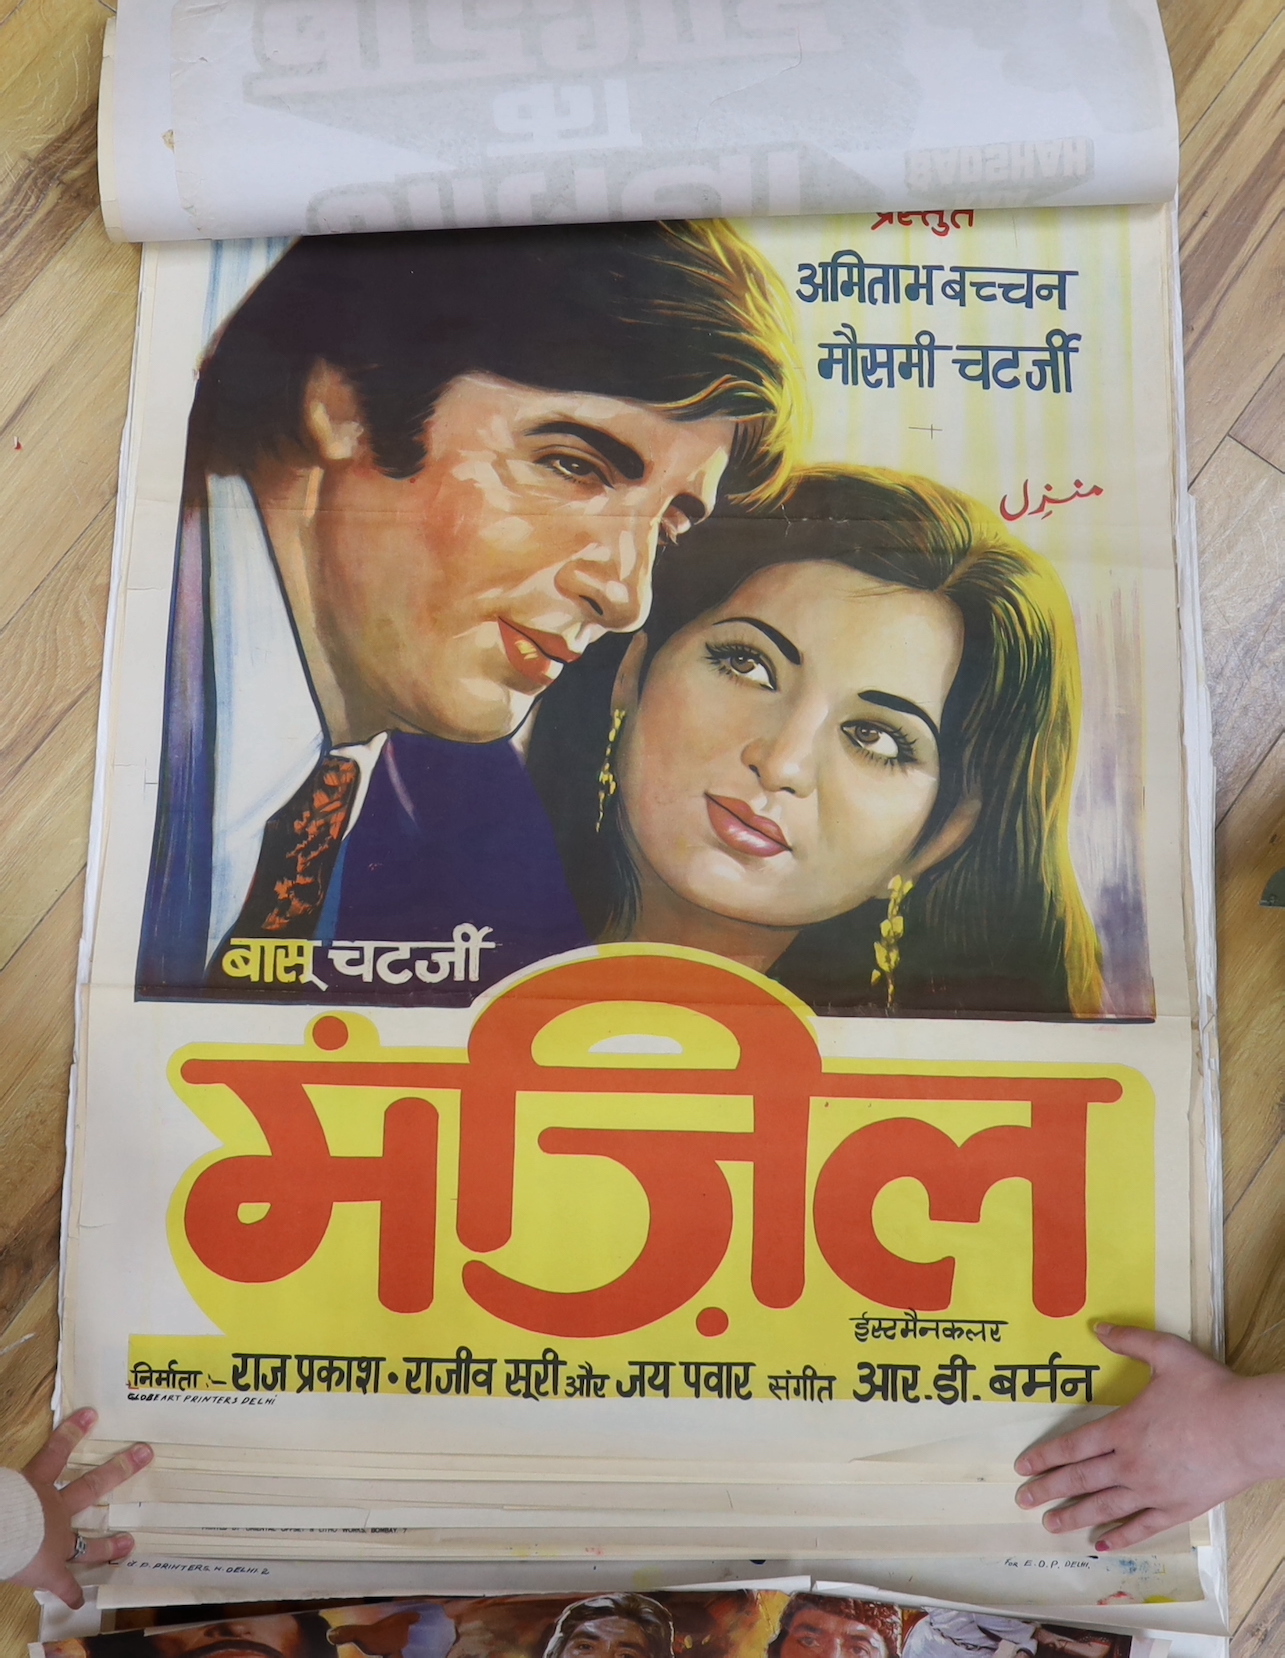 A collection of Indian film posters